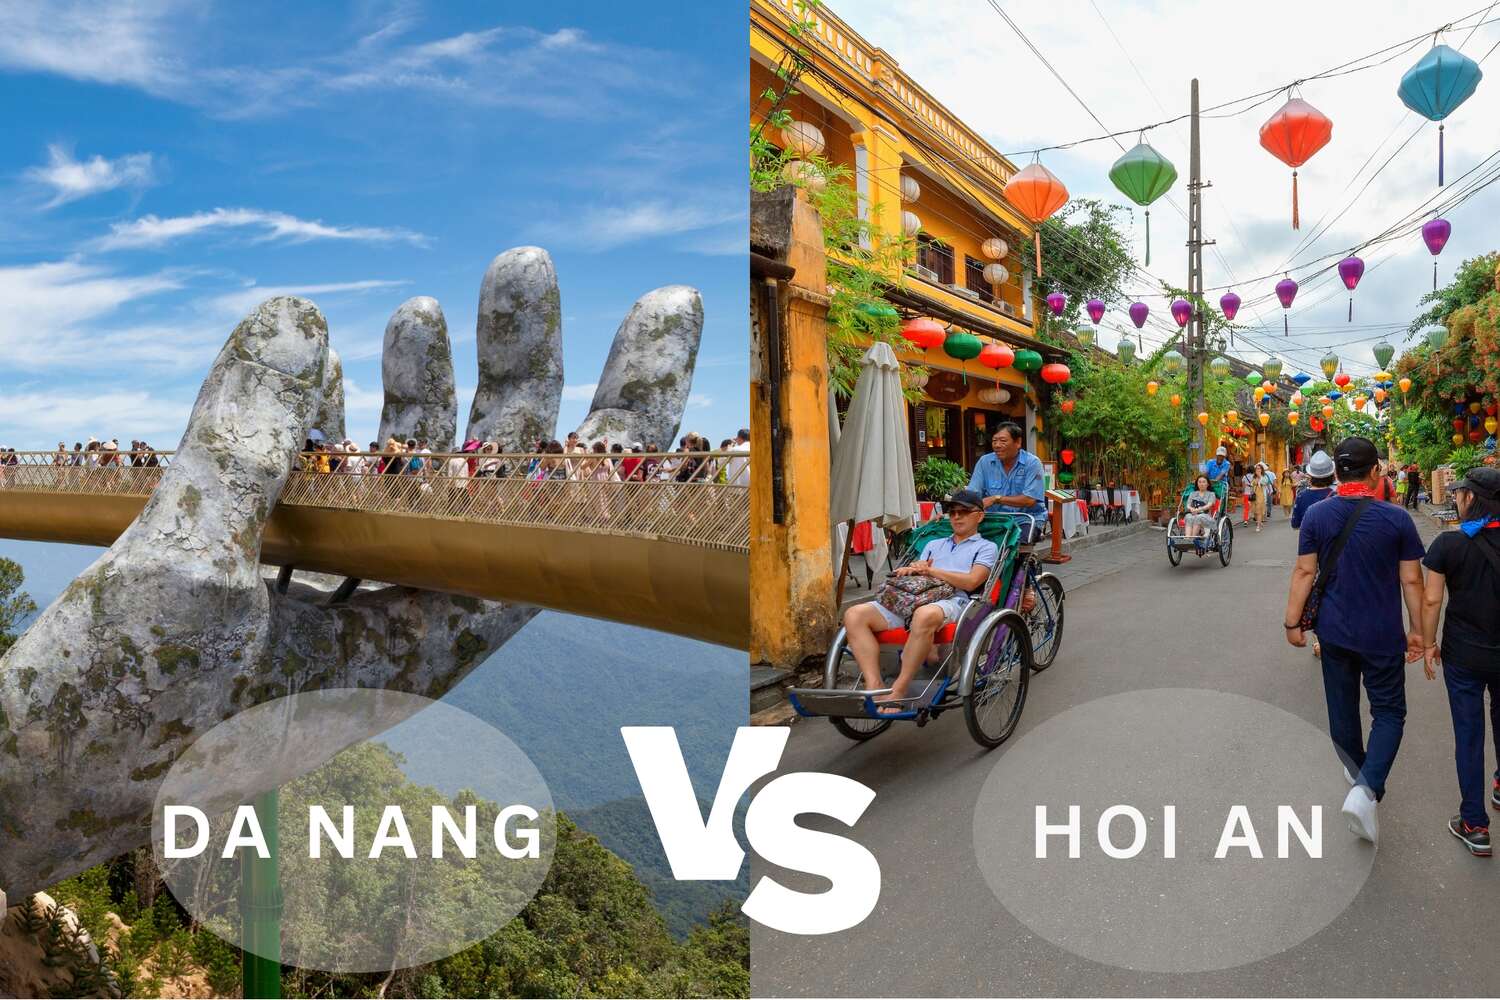 Da-Nang-or-Hoi-An-Which-is-Better-to-Visit